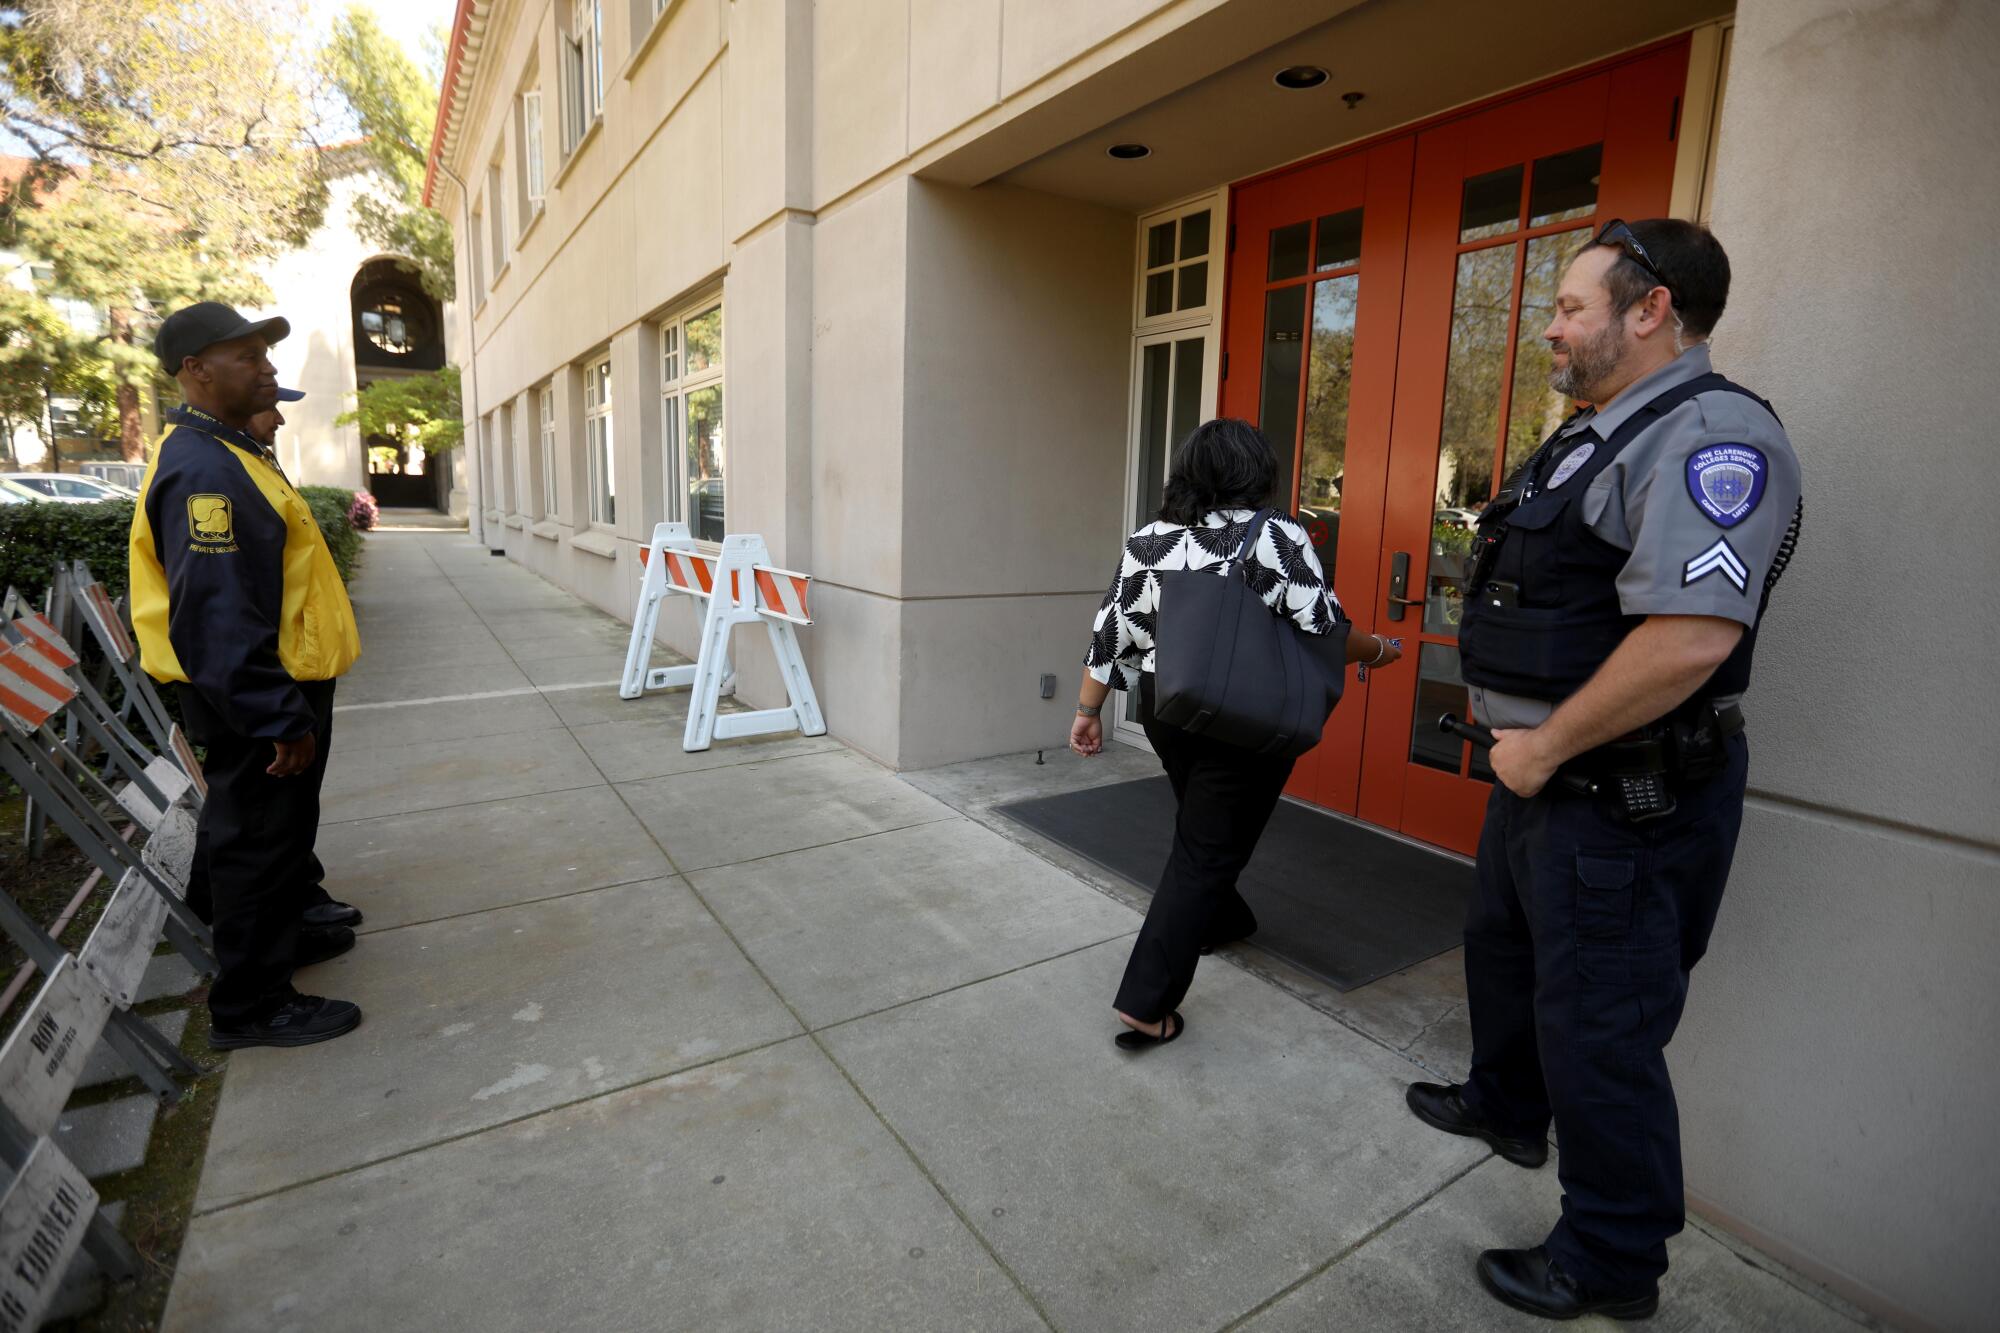 Campus safety officers stand outside a building while another person enters it.